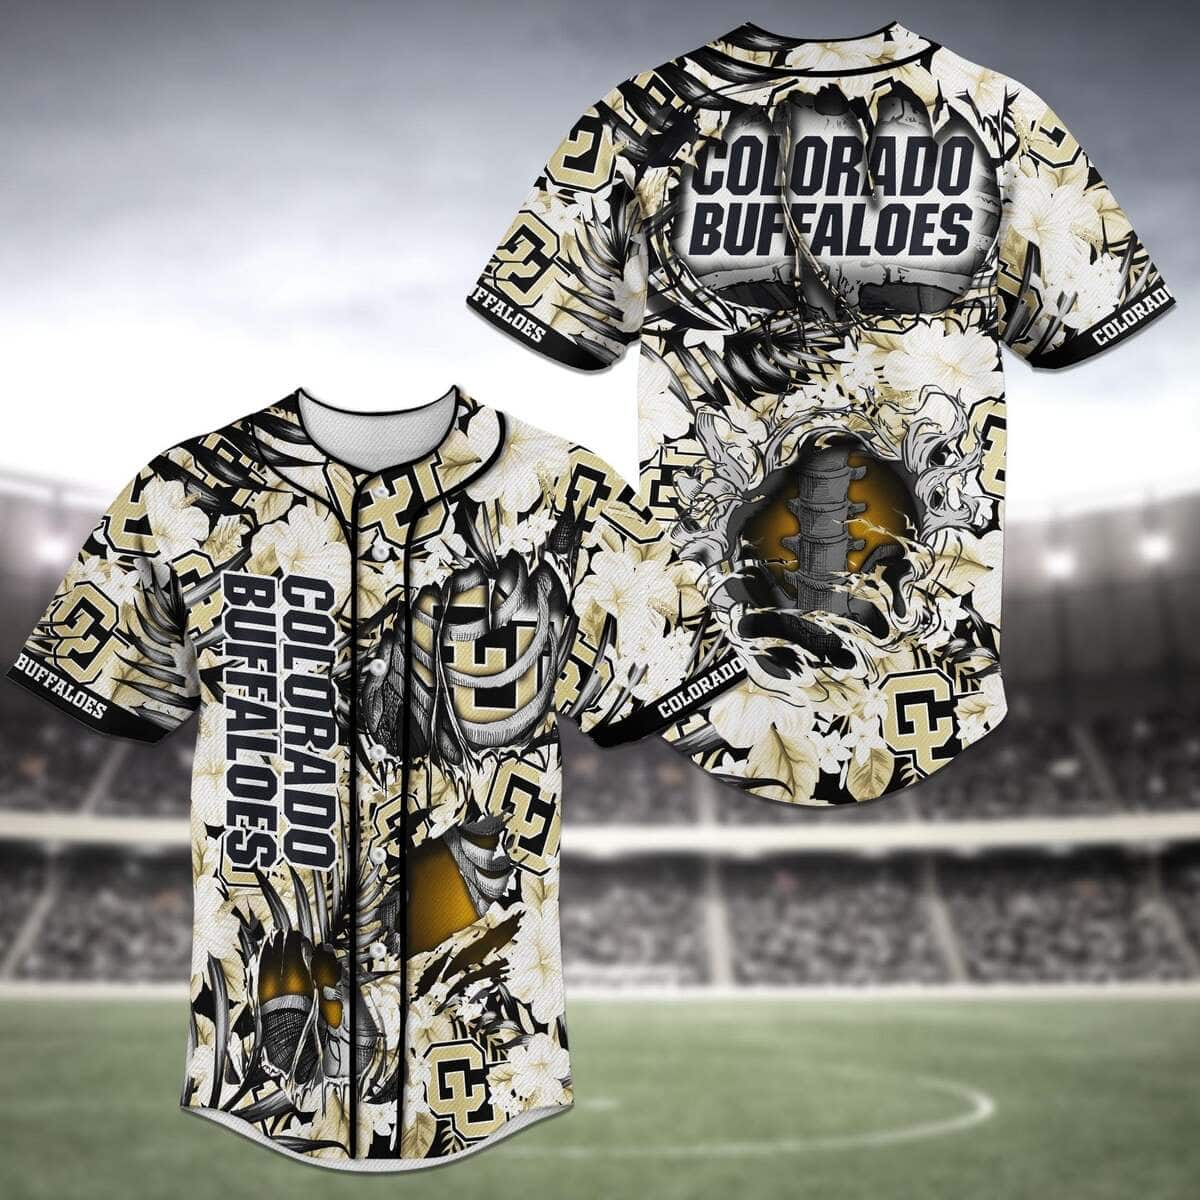 Cool NFL Colorado Buffaloes Baseball Jersey Skeleton Gift For Fans